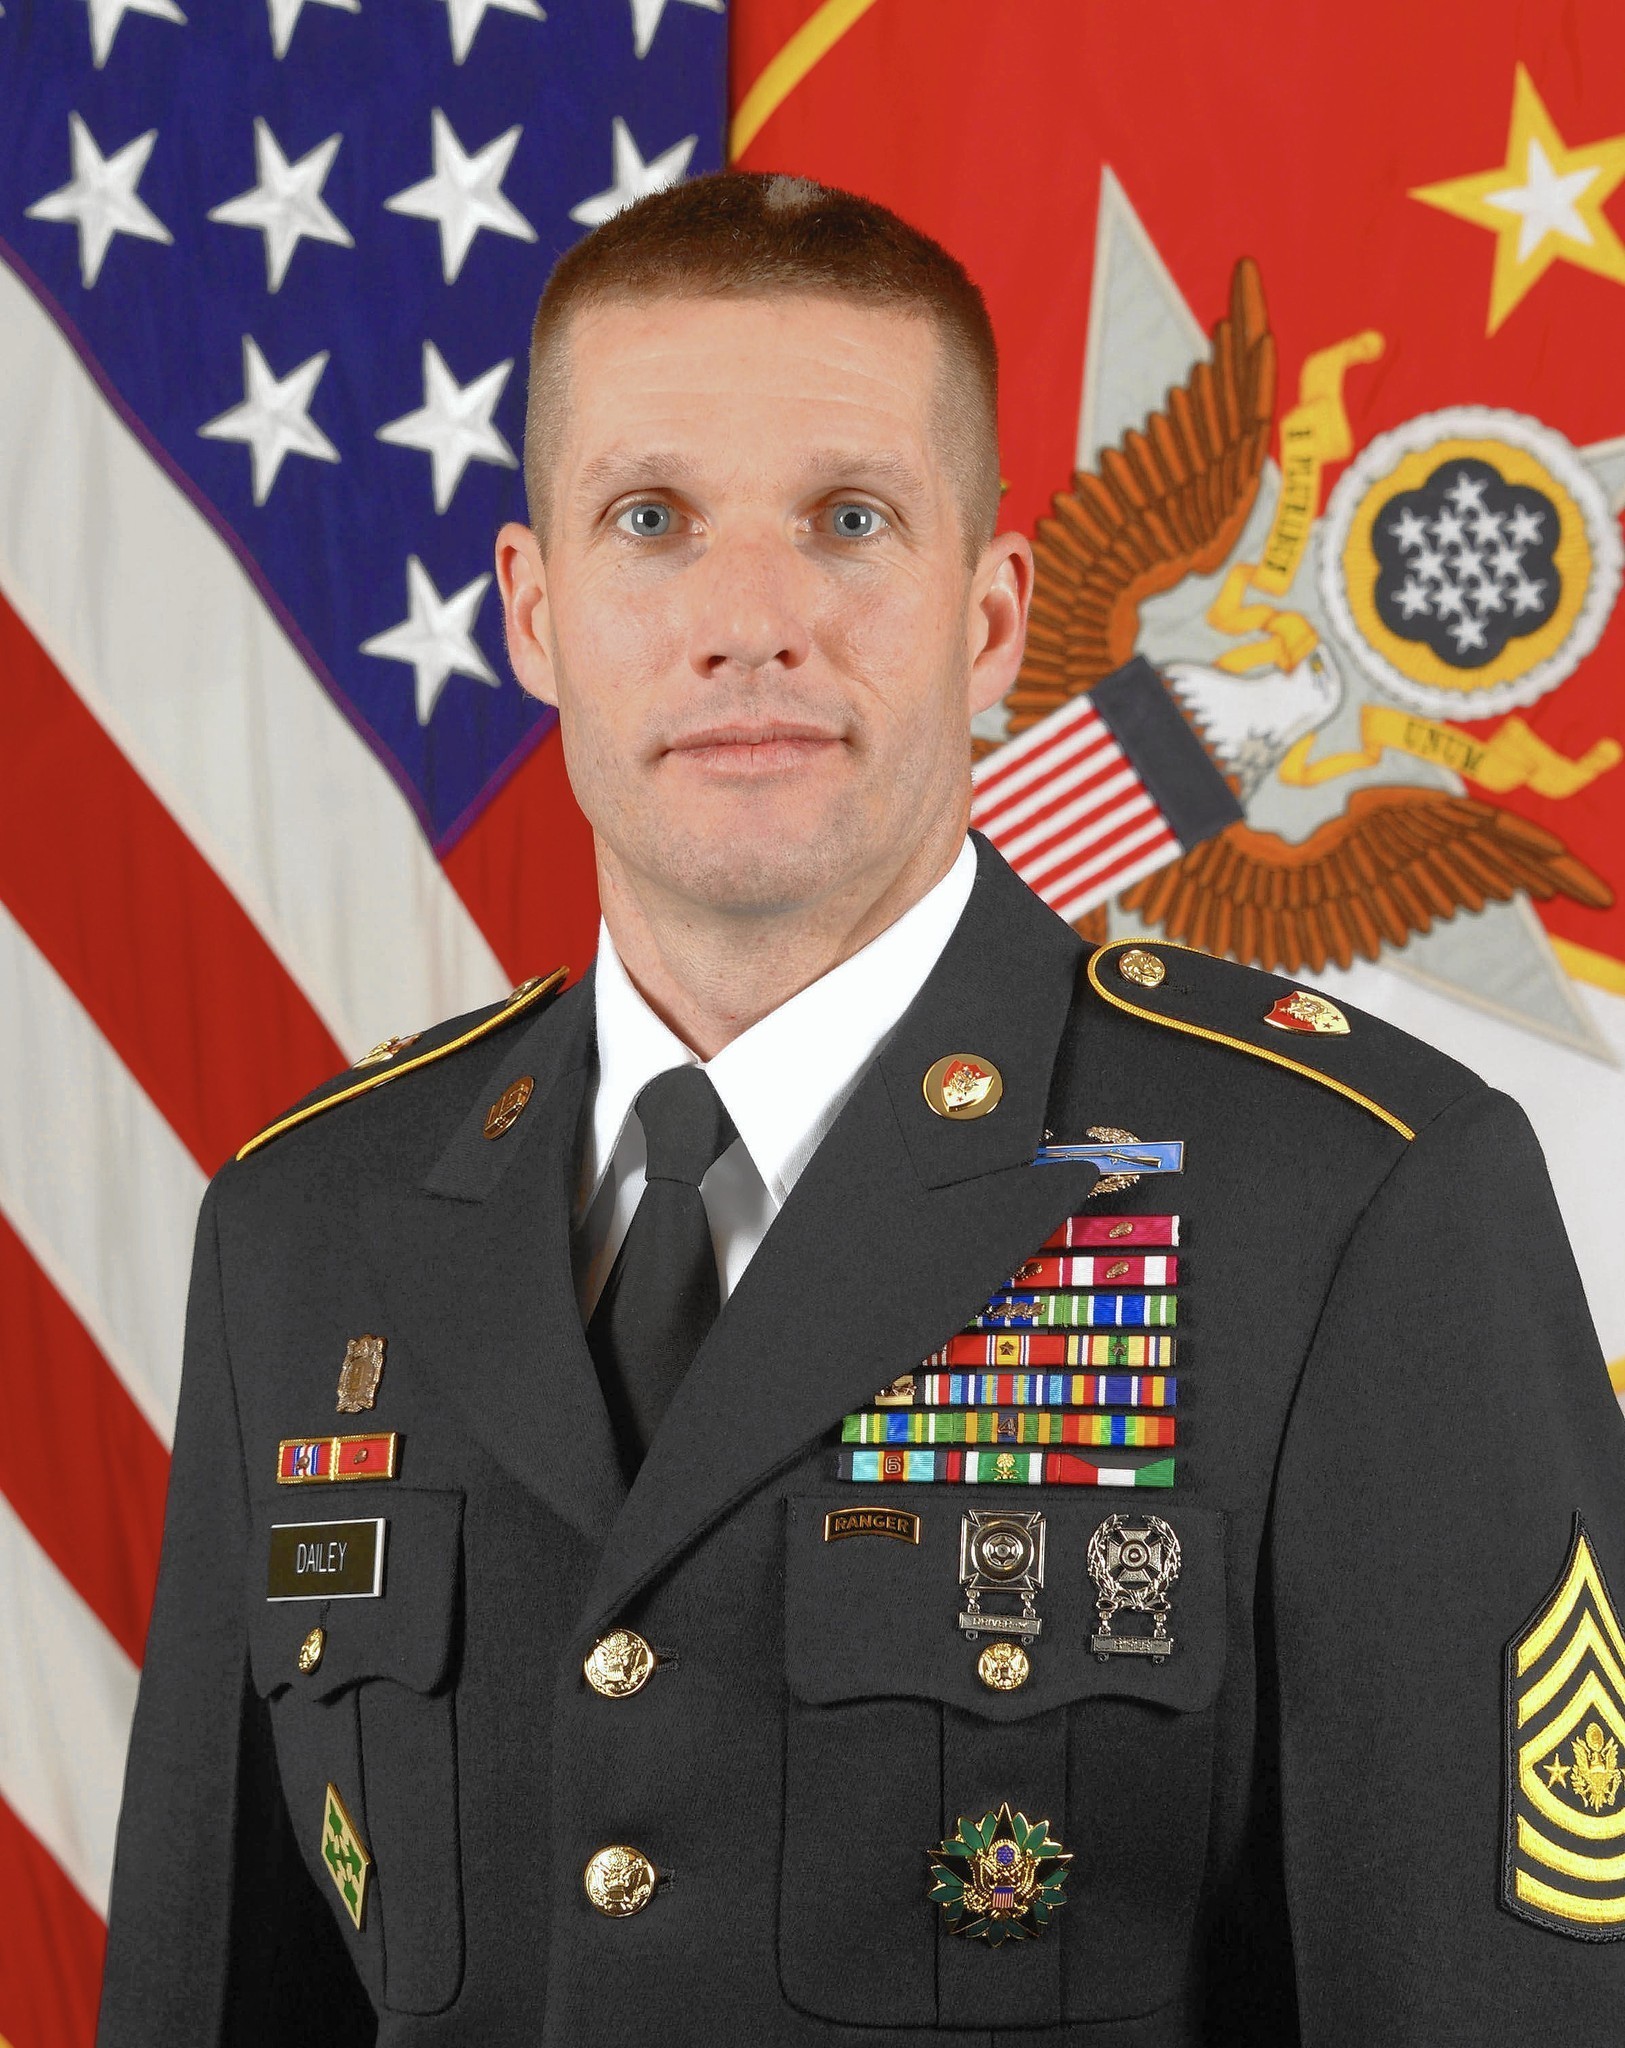 Newsmaker Q&A Daniel Dailey, sergeant major of the U.S. Army The